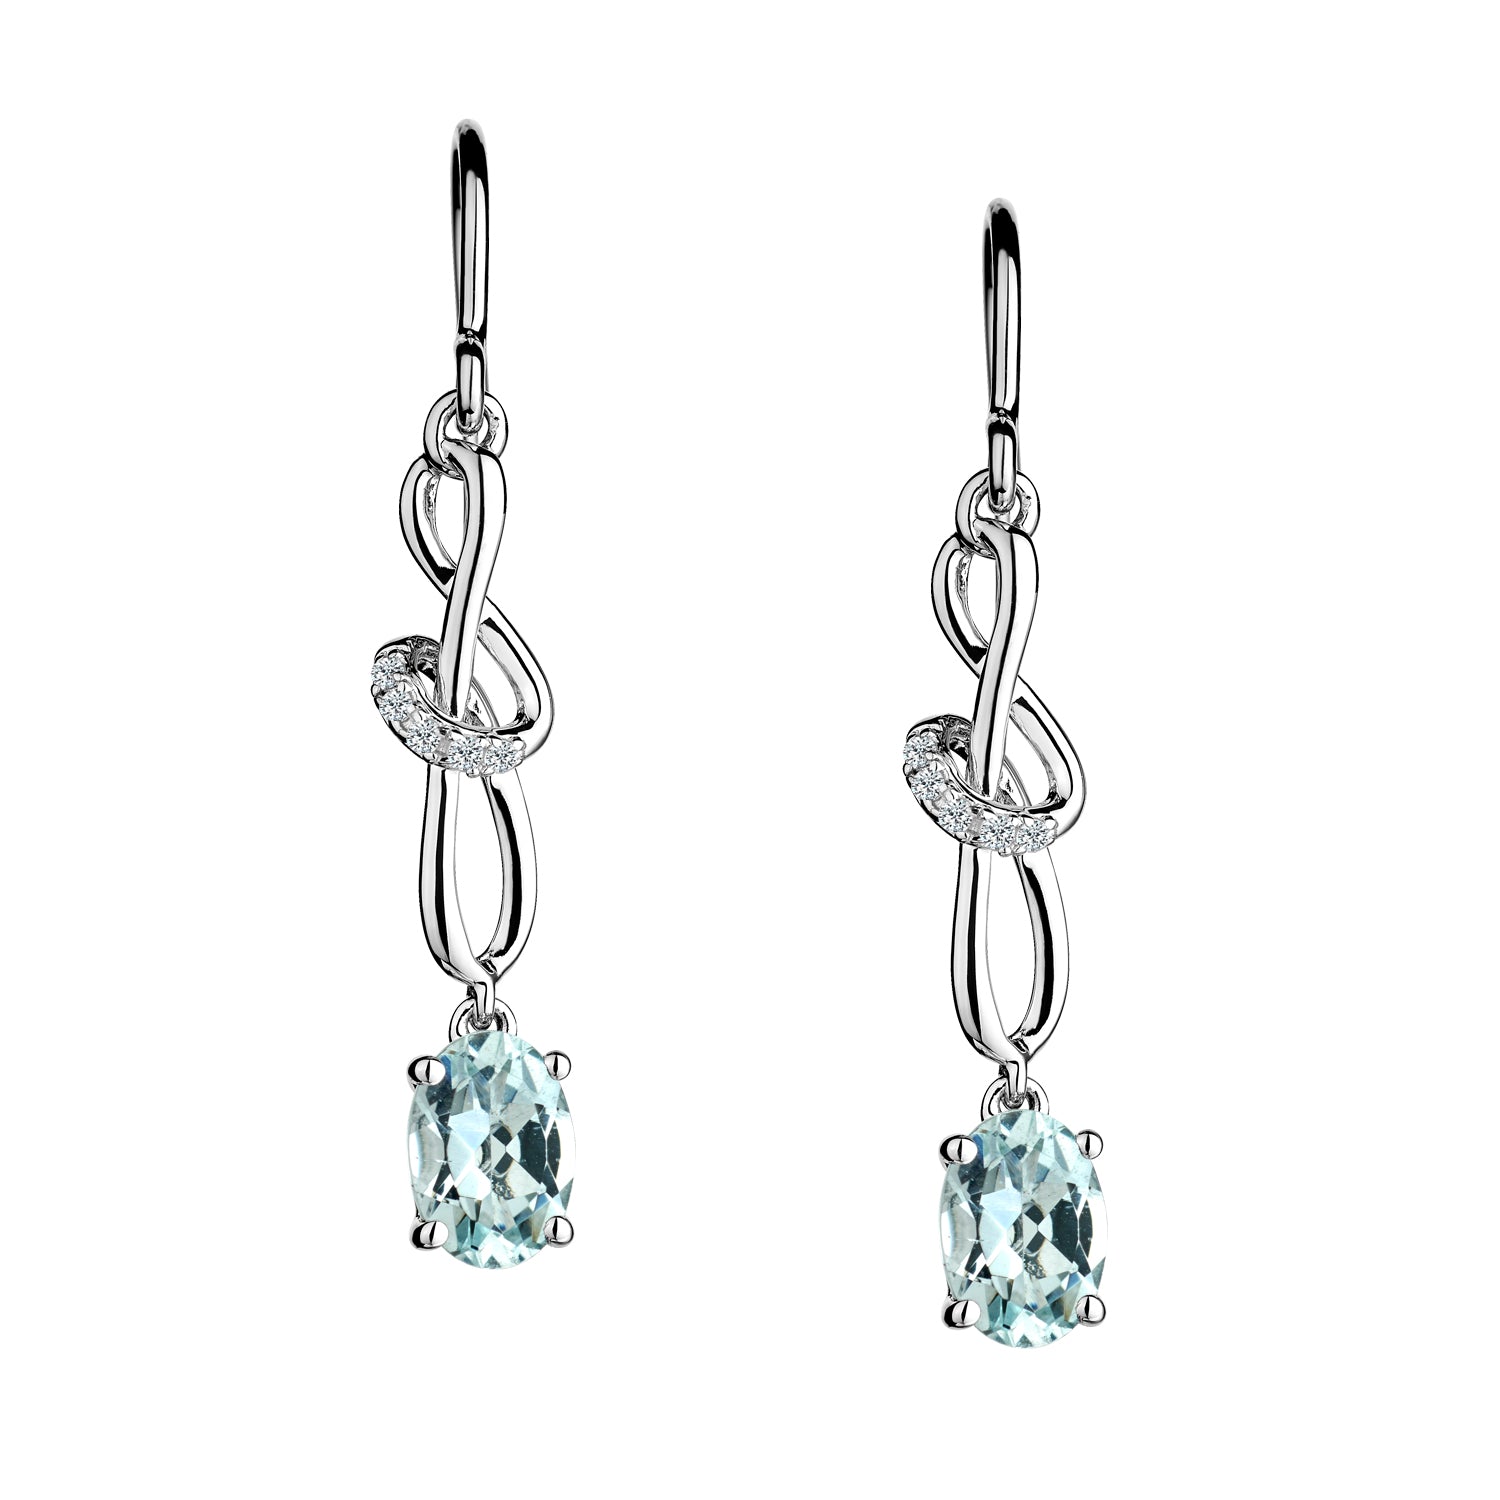 Genuine Aquamarine And White Sapphire Drop Earrings, Silver.....................NOW